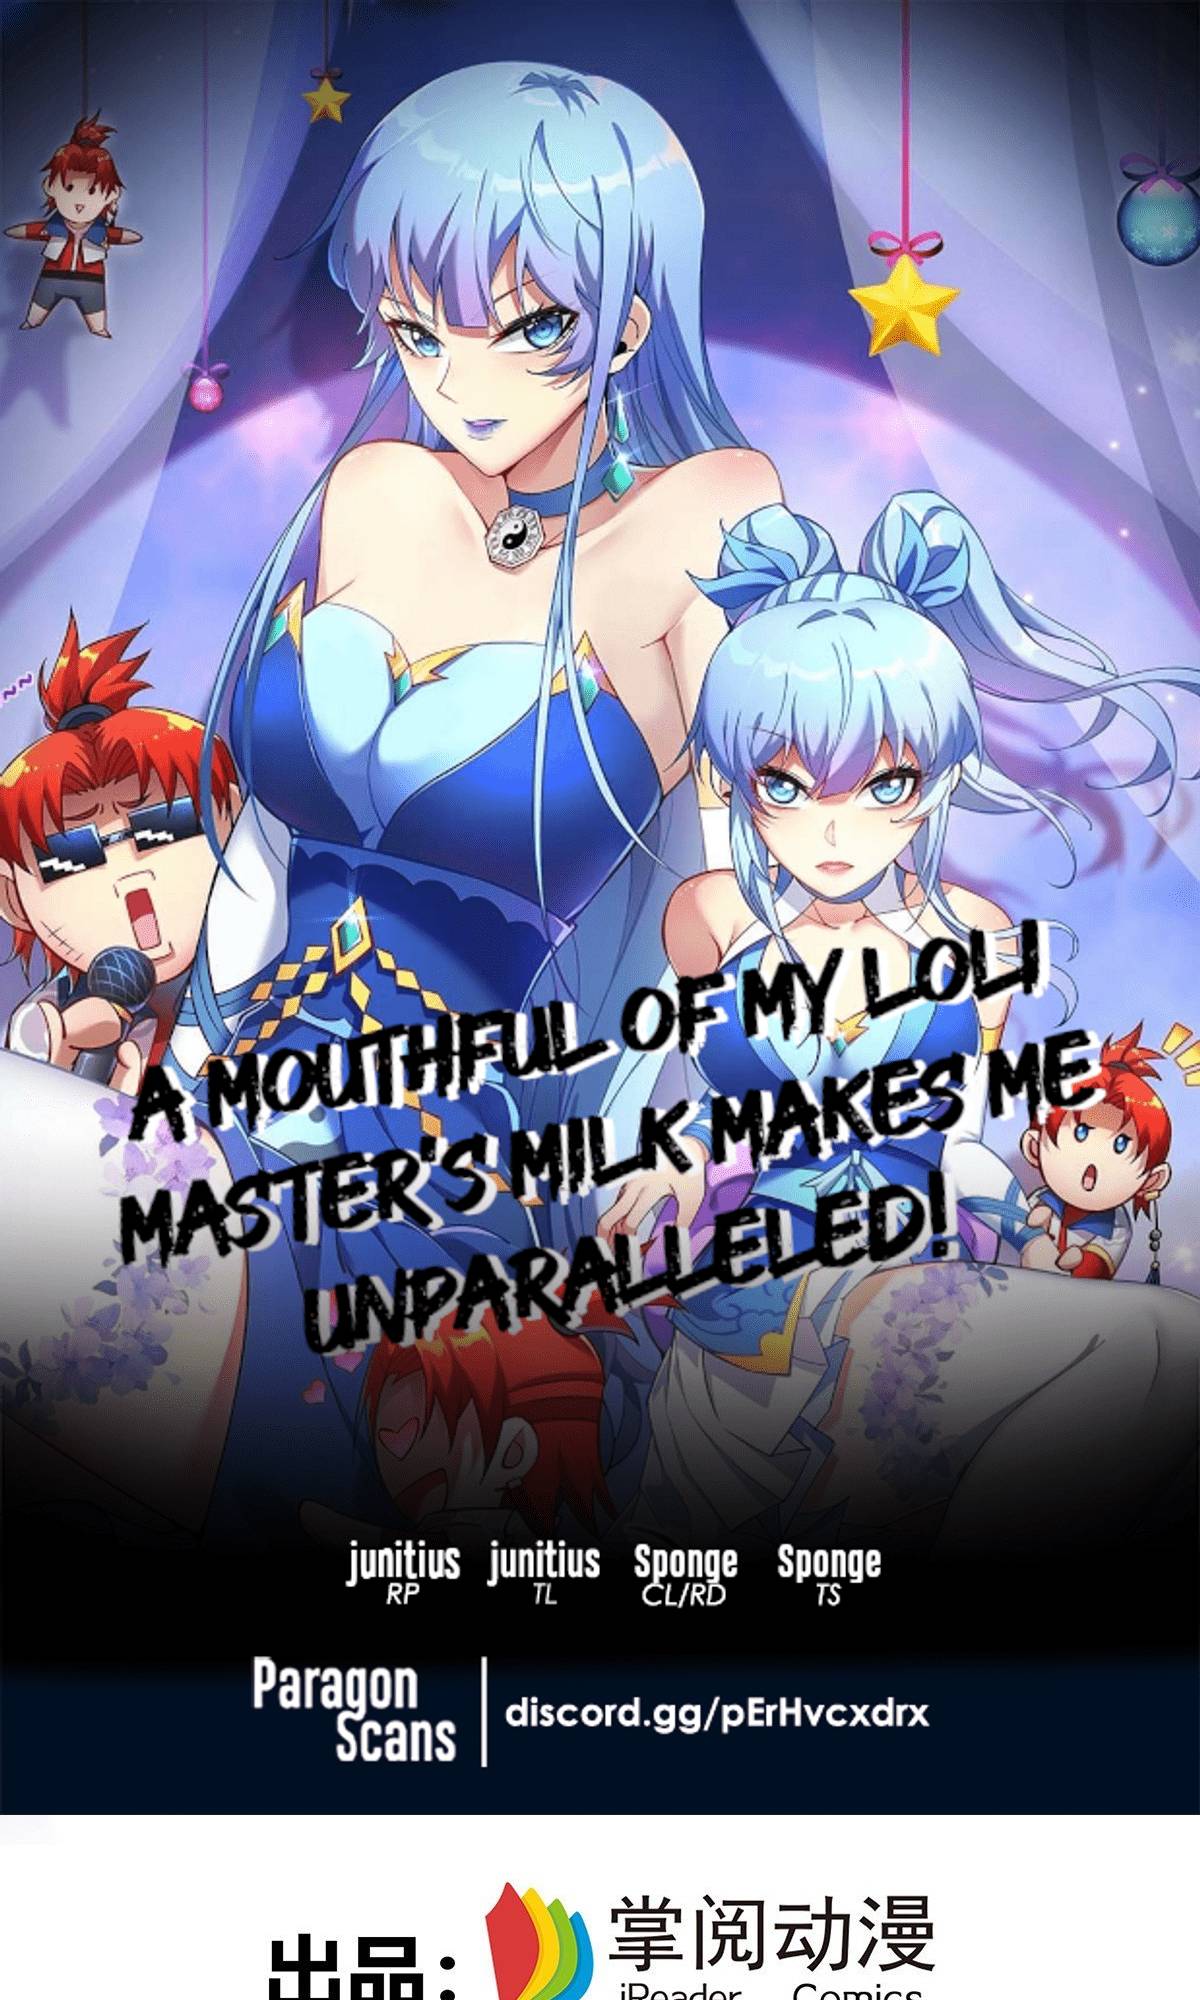 A Mouthful Of My Loli Master's Milk Makes Me Unparalleled - chapter 9 - #1